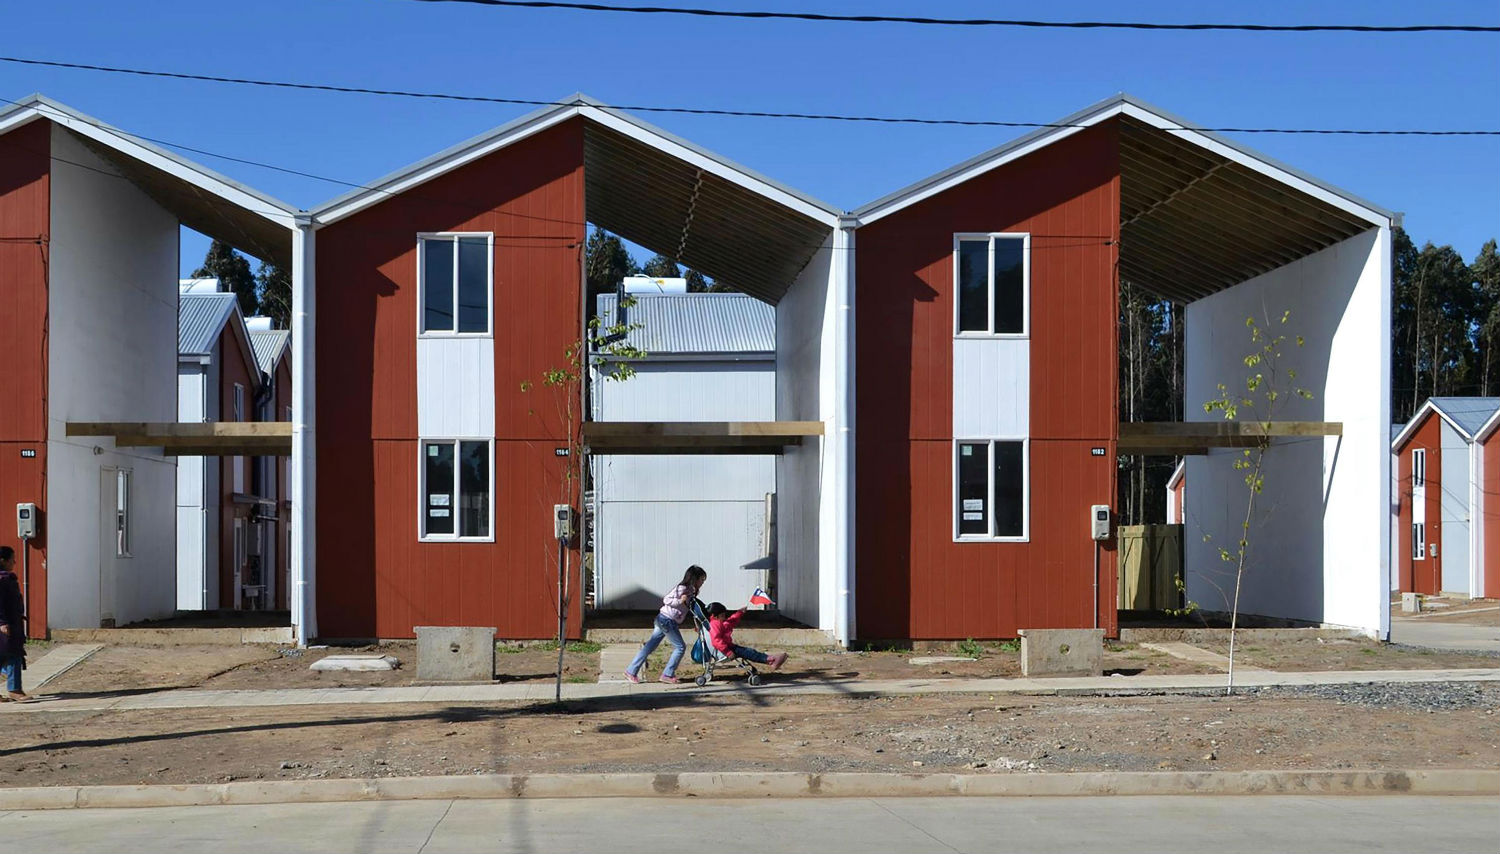 Chilean architect Alejandro Aravena uses a ‘half-built home’ technique to make strong, sustainable homes affordable to the poor and those displaced by disaster. With government subsidies, His firm provides the basic structure, and residents add to this as money allows. The bottom-up approach involves local people in the design
